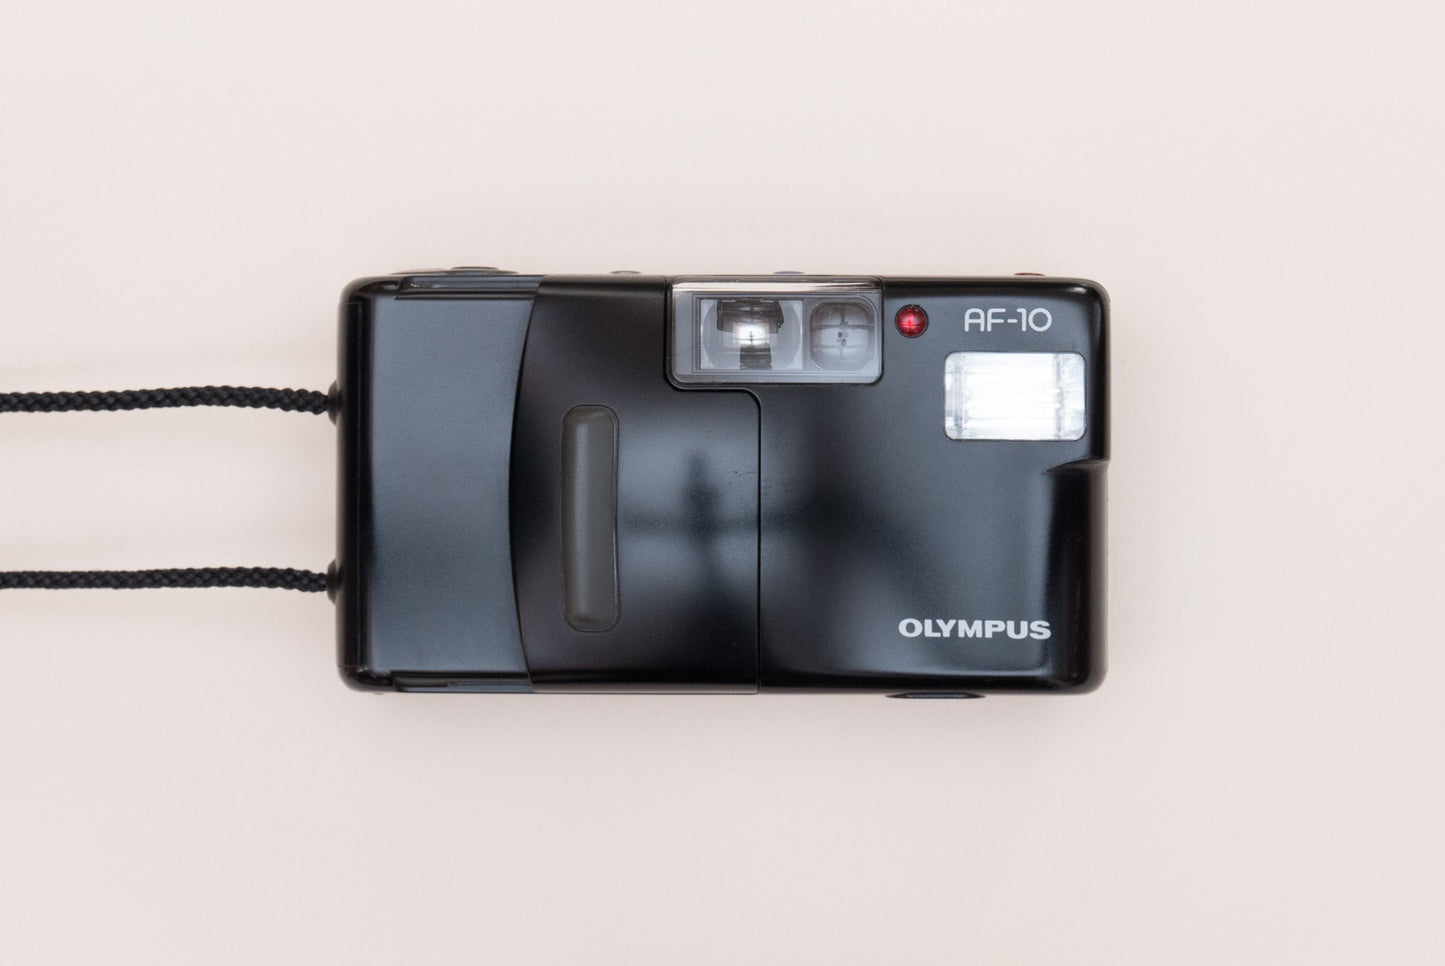 Olympus AF-10 Compact 35mm Point and Shoot Film Camera